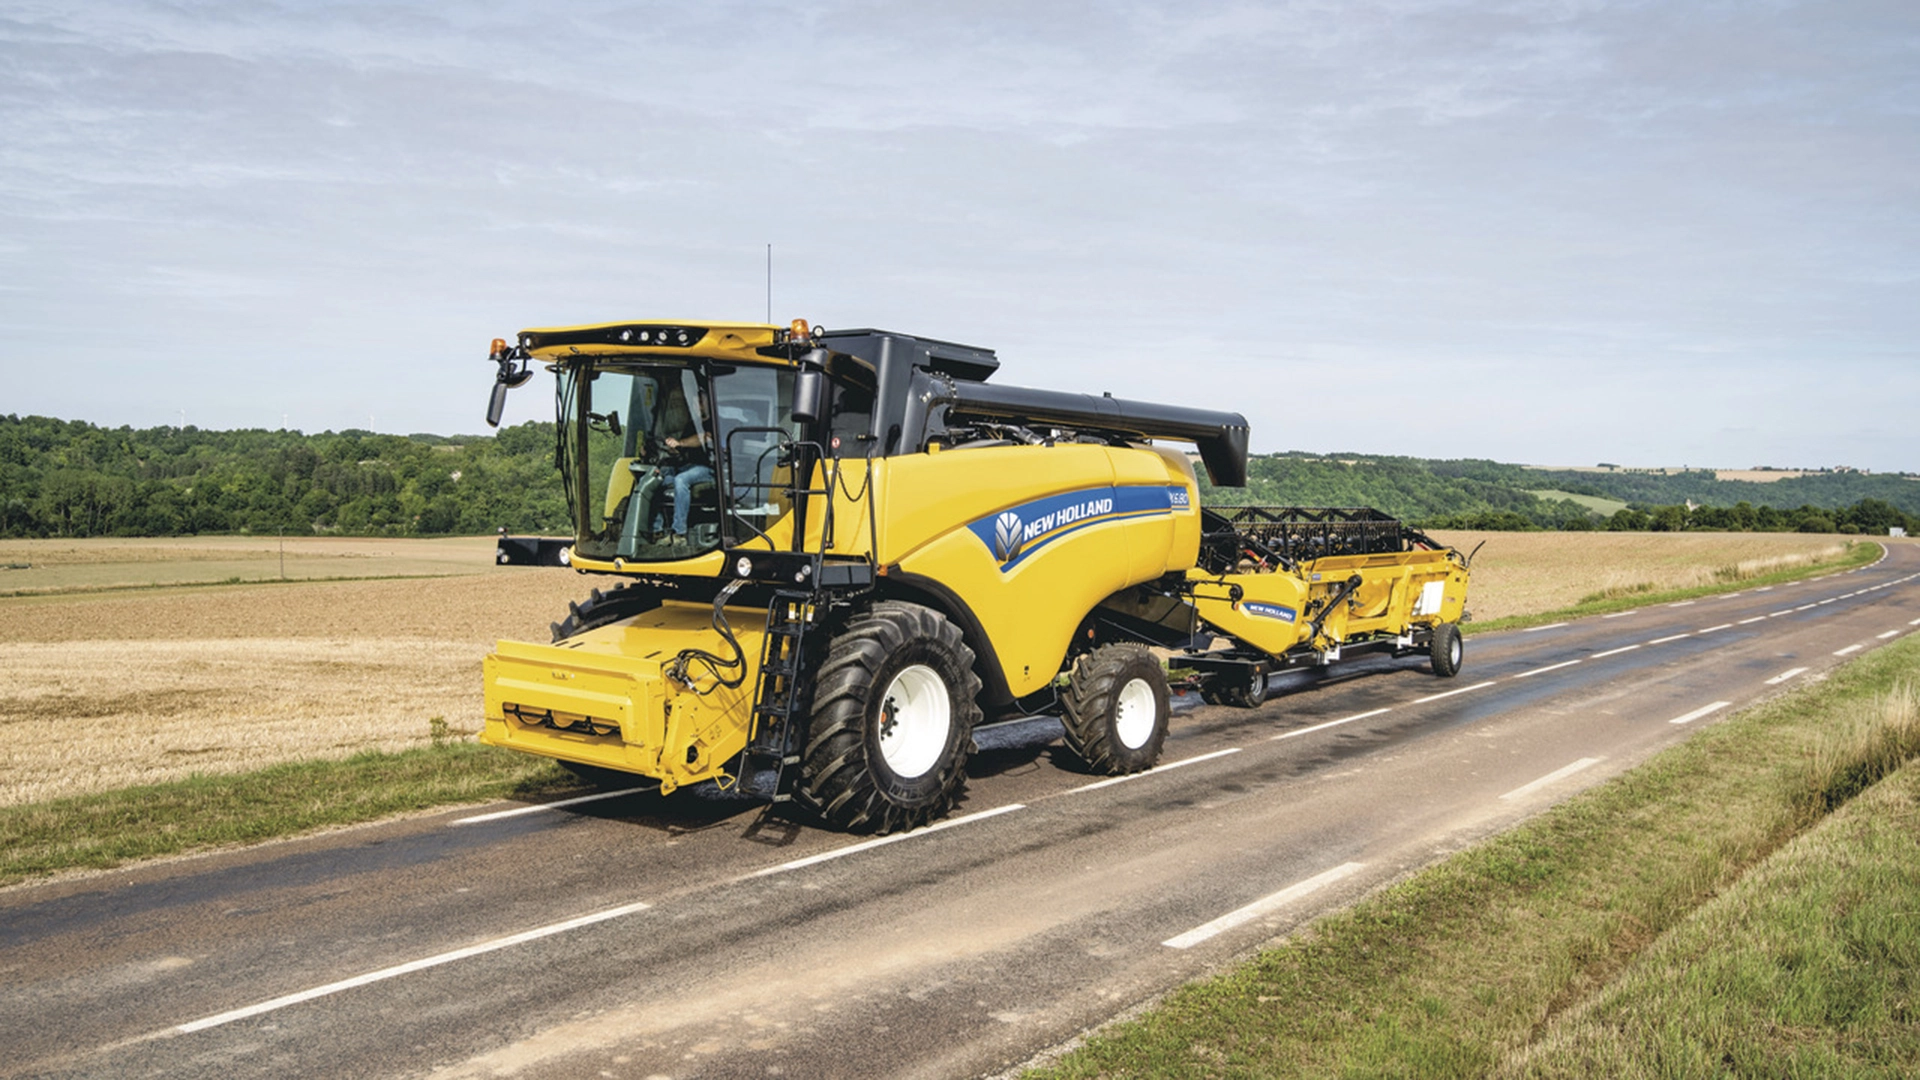 CX5-CX6 New Holland Combine harvester on the road